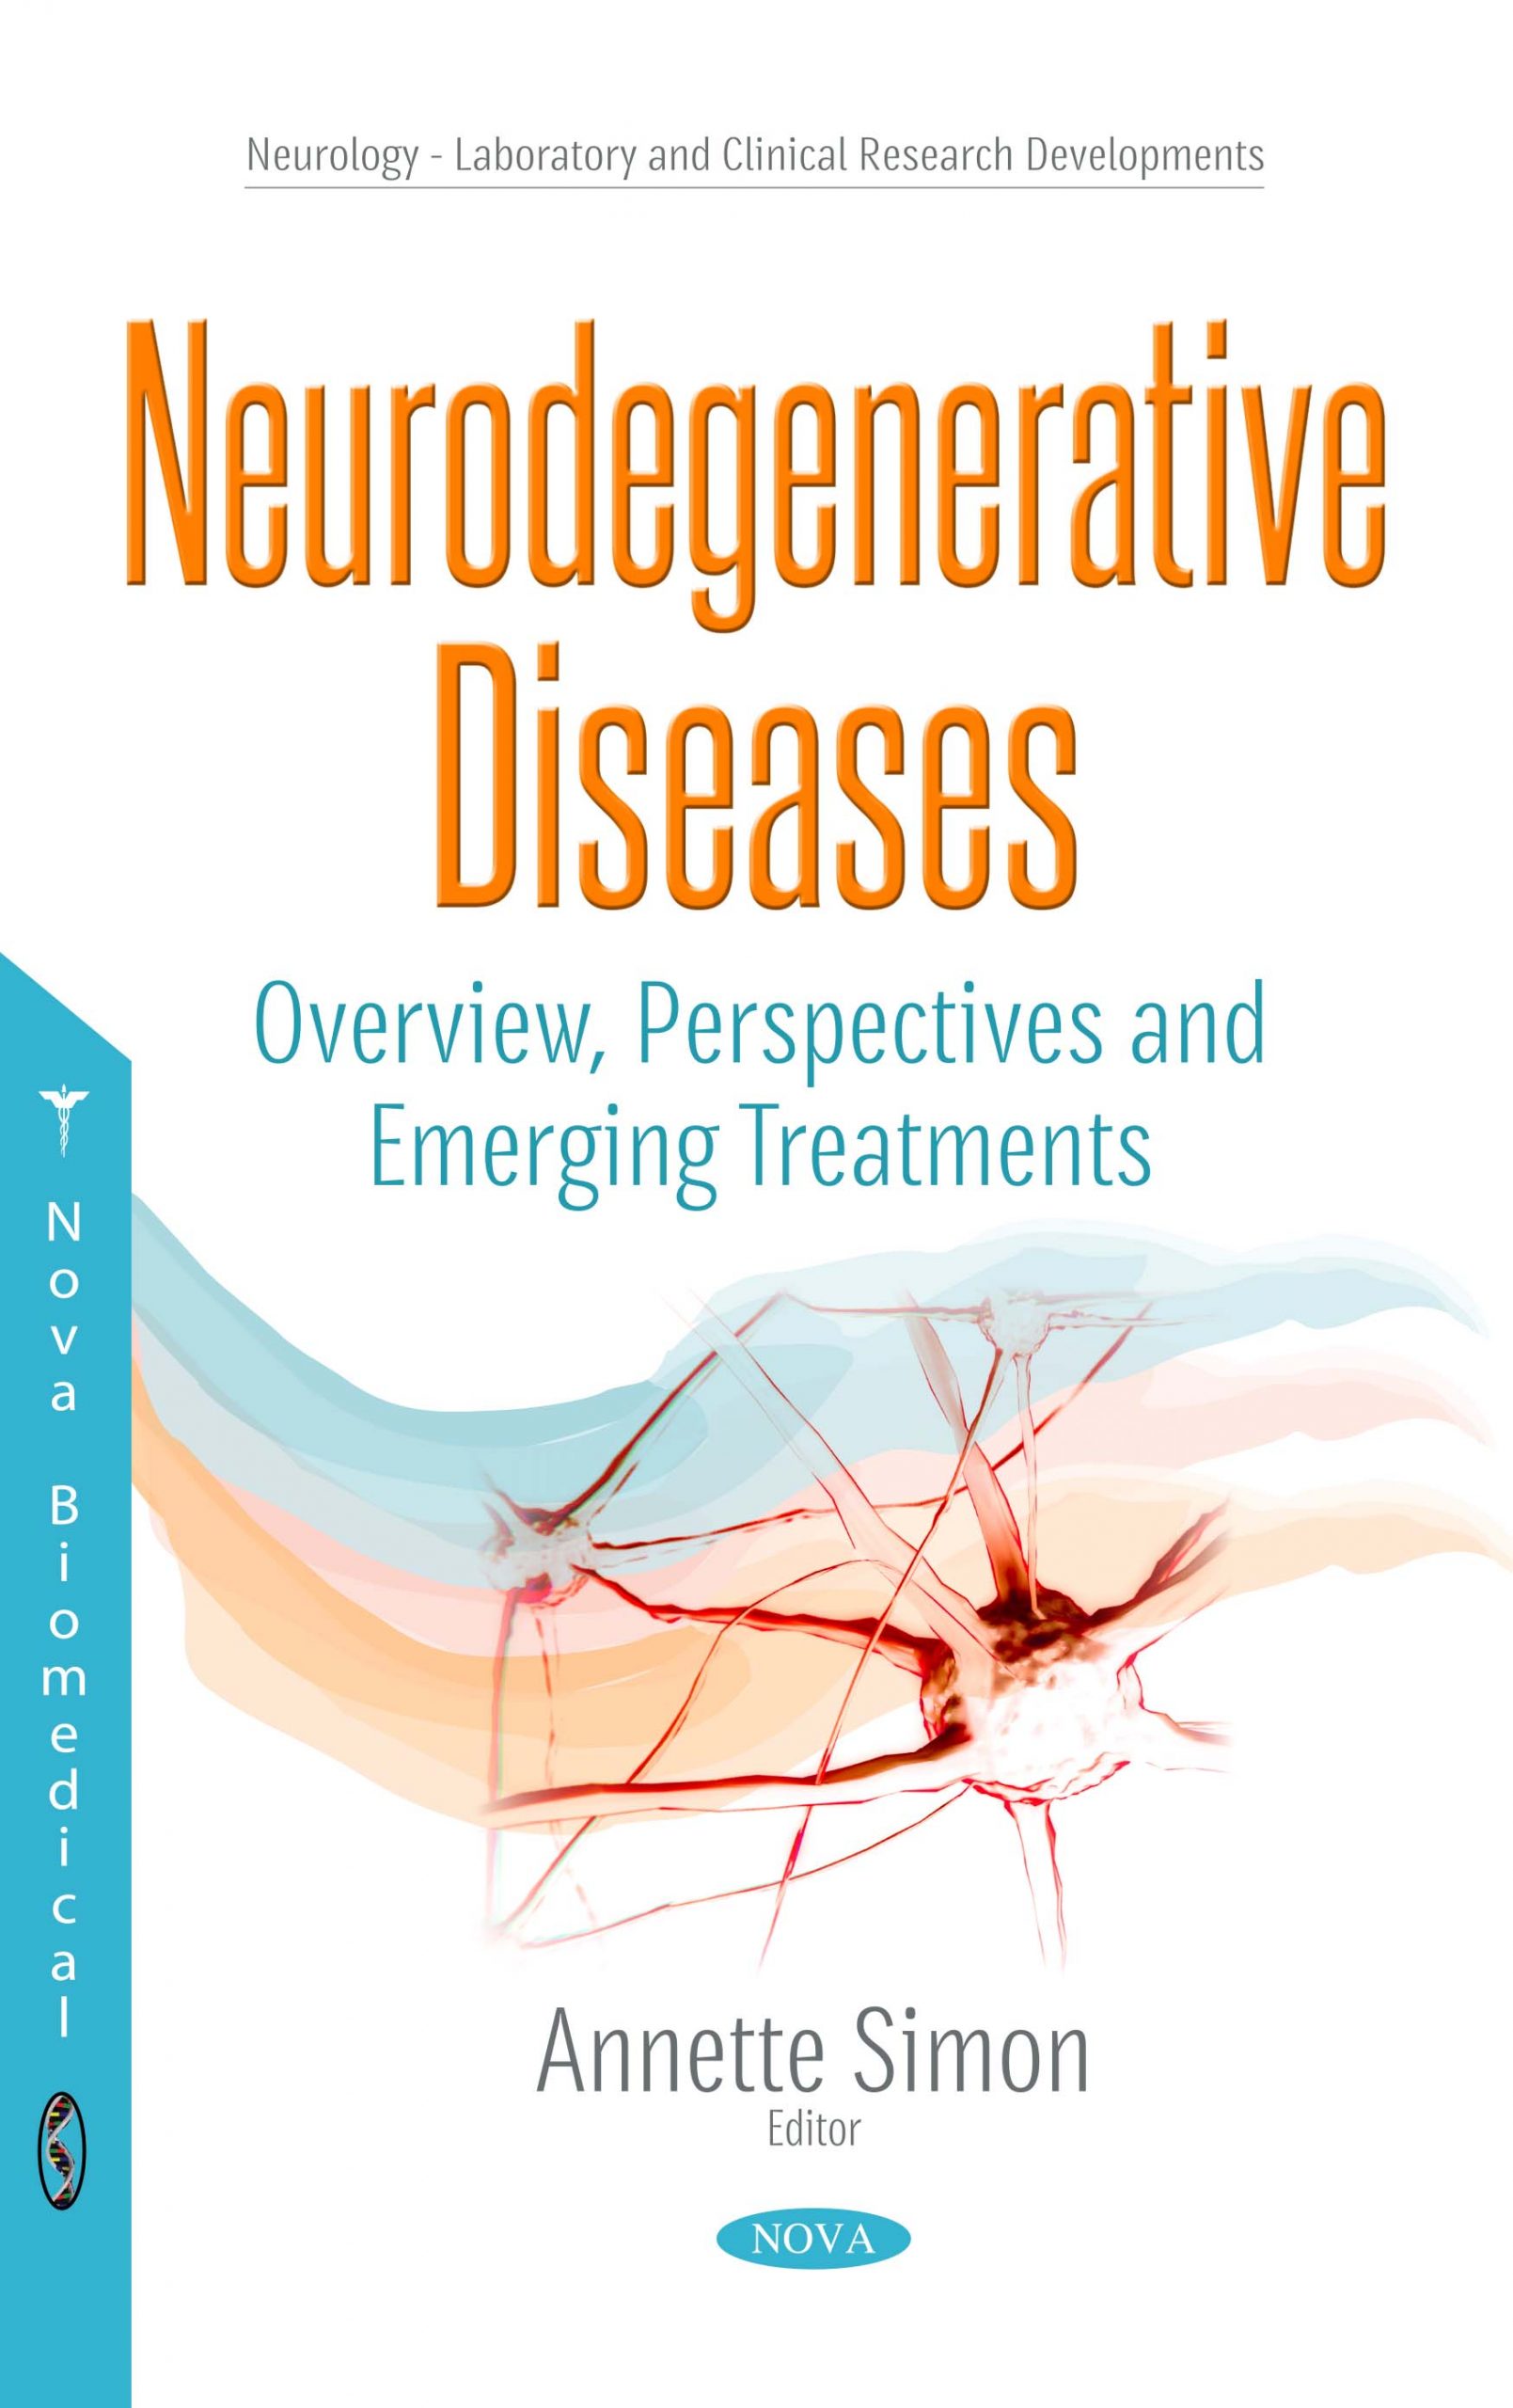 Neurodegenerative-Diseases-Overview-Perspectives-and-Emerging-Treatments.jpg